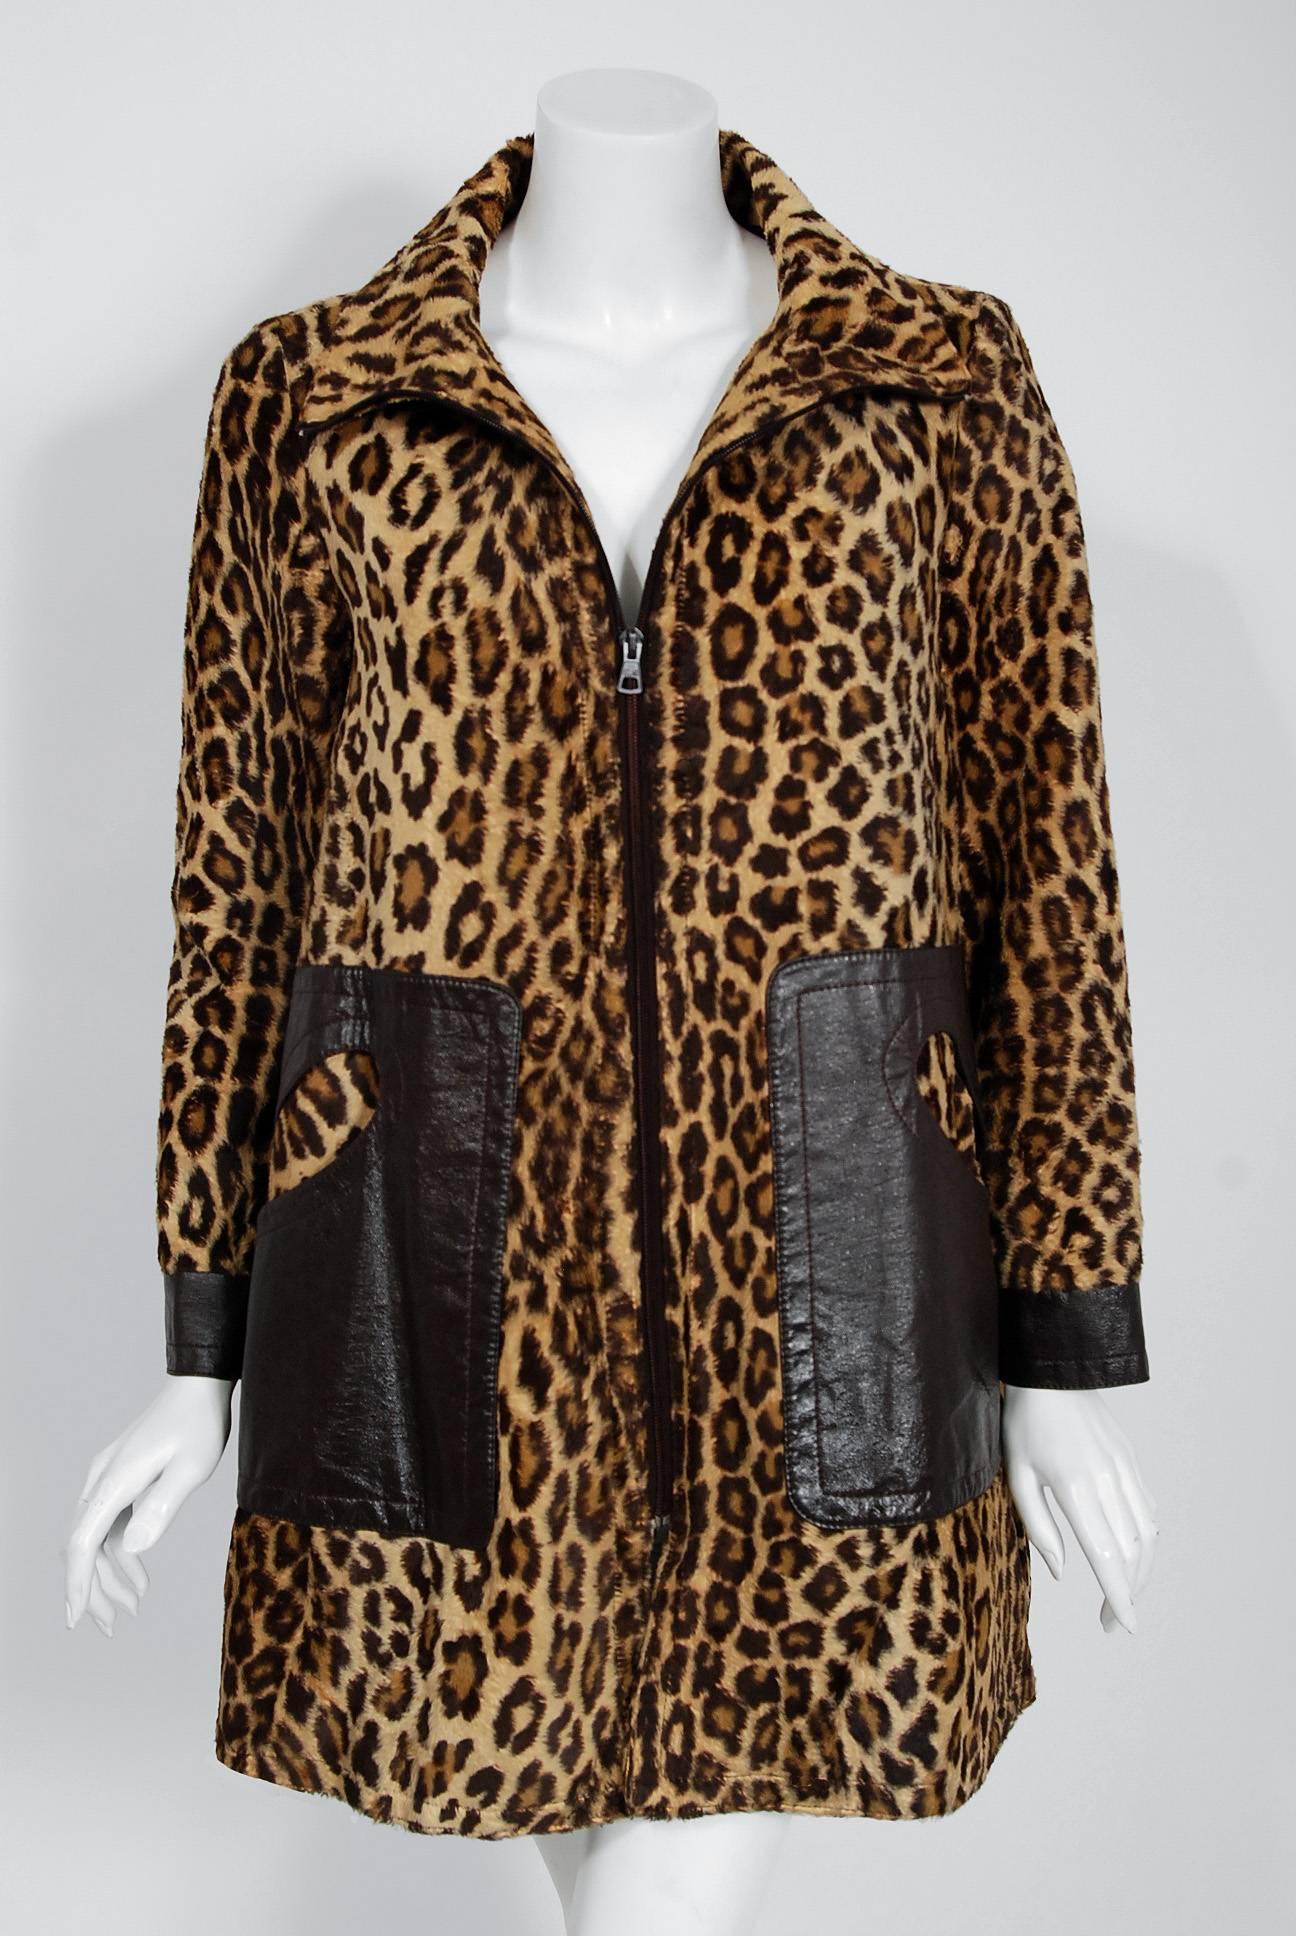 Marvelous 1968 Pierre Cardin designer jacket in a rich fully-lined leopard print faux-fur. In 1951 Cardin opened his own couture house and by 1957, he started a ready-to-wear line; a bold move for a French couturier at the time. The look most